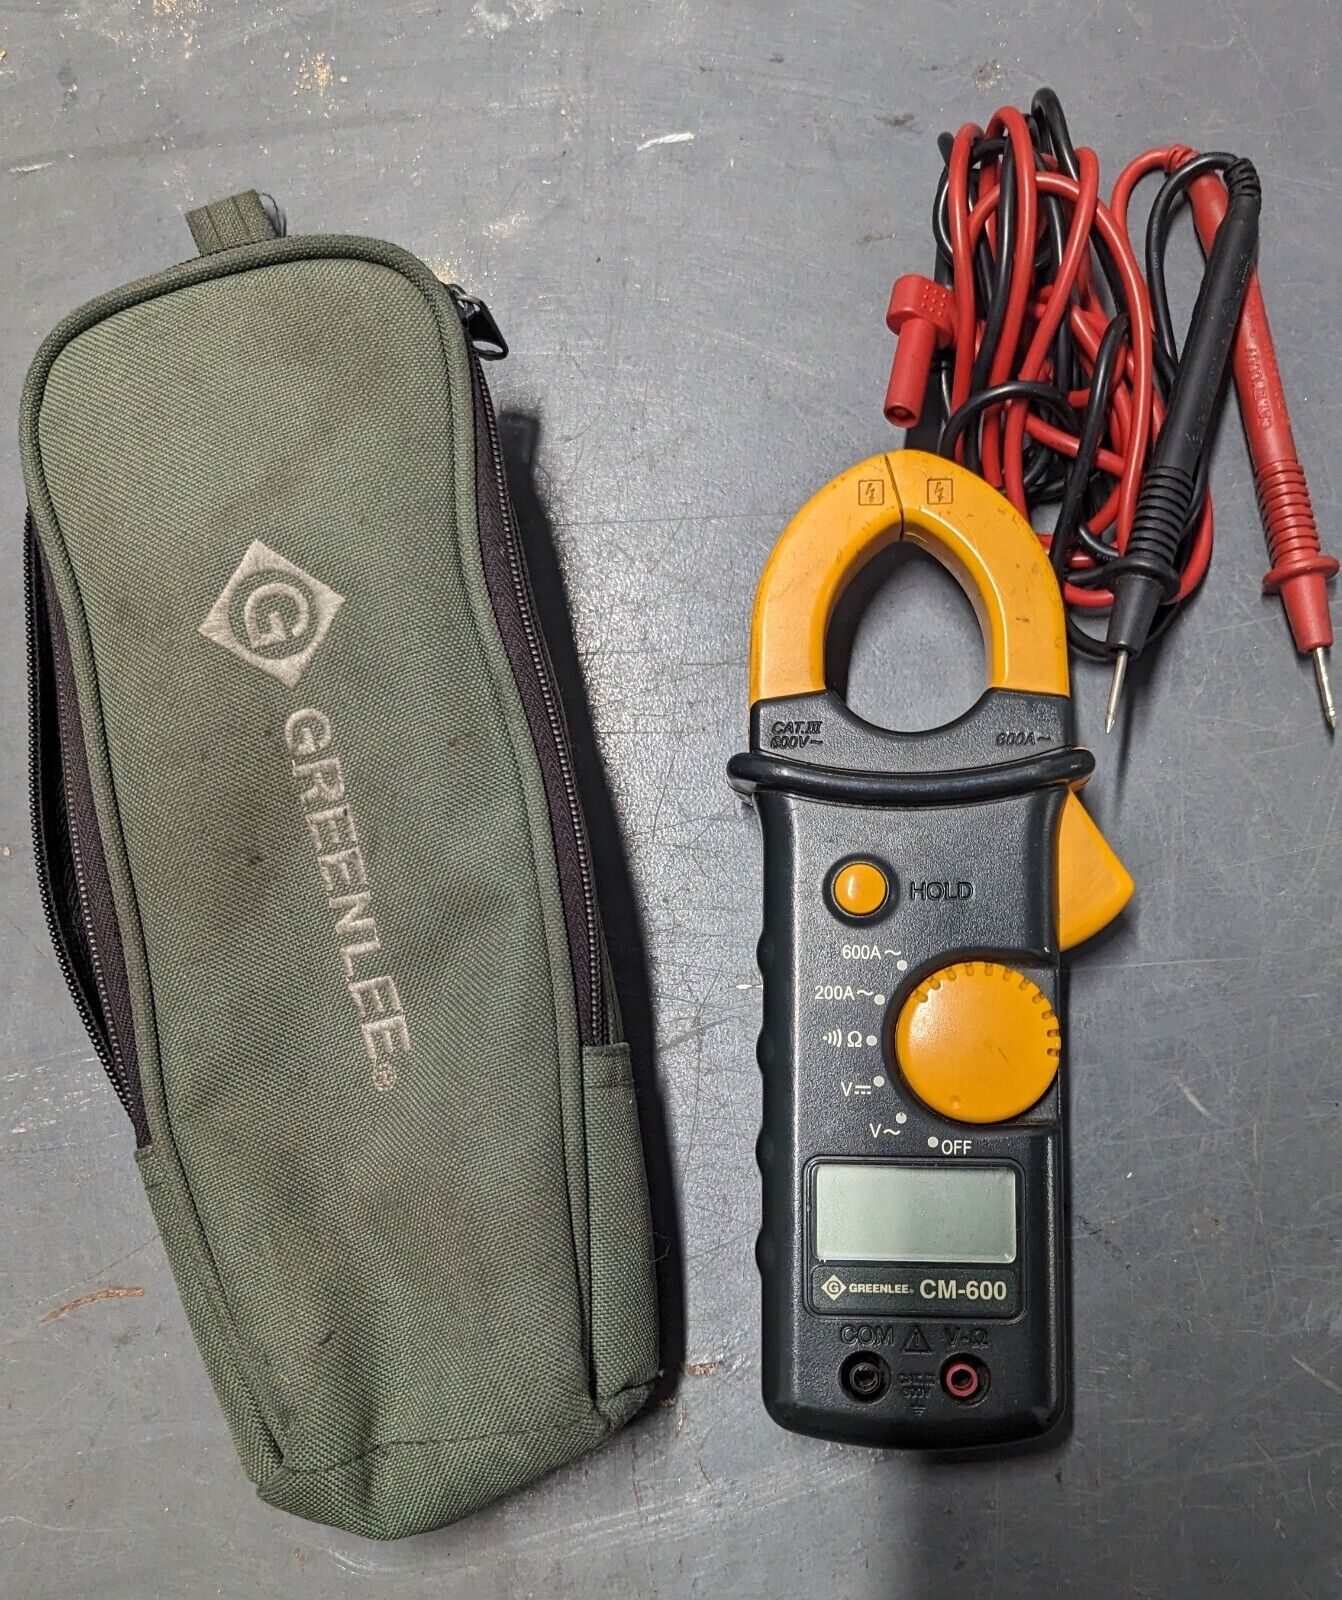 Greenlee CM-660 600a, 600V, AC True RMS Clamp Meter